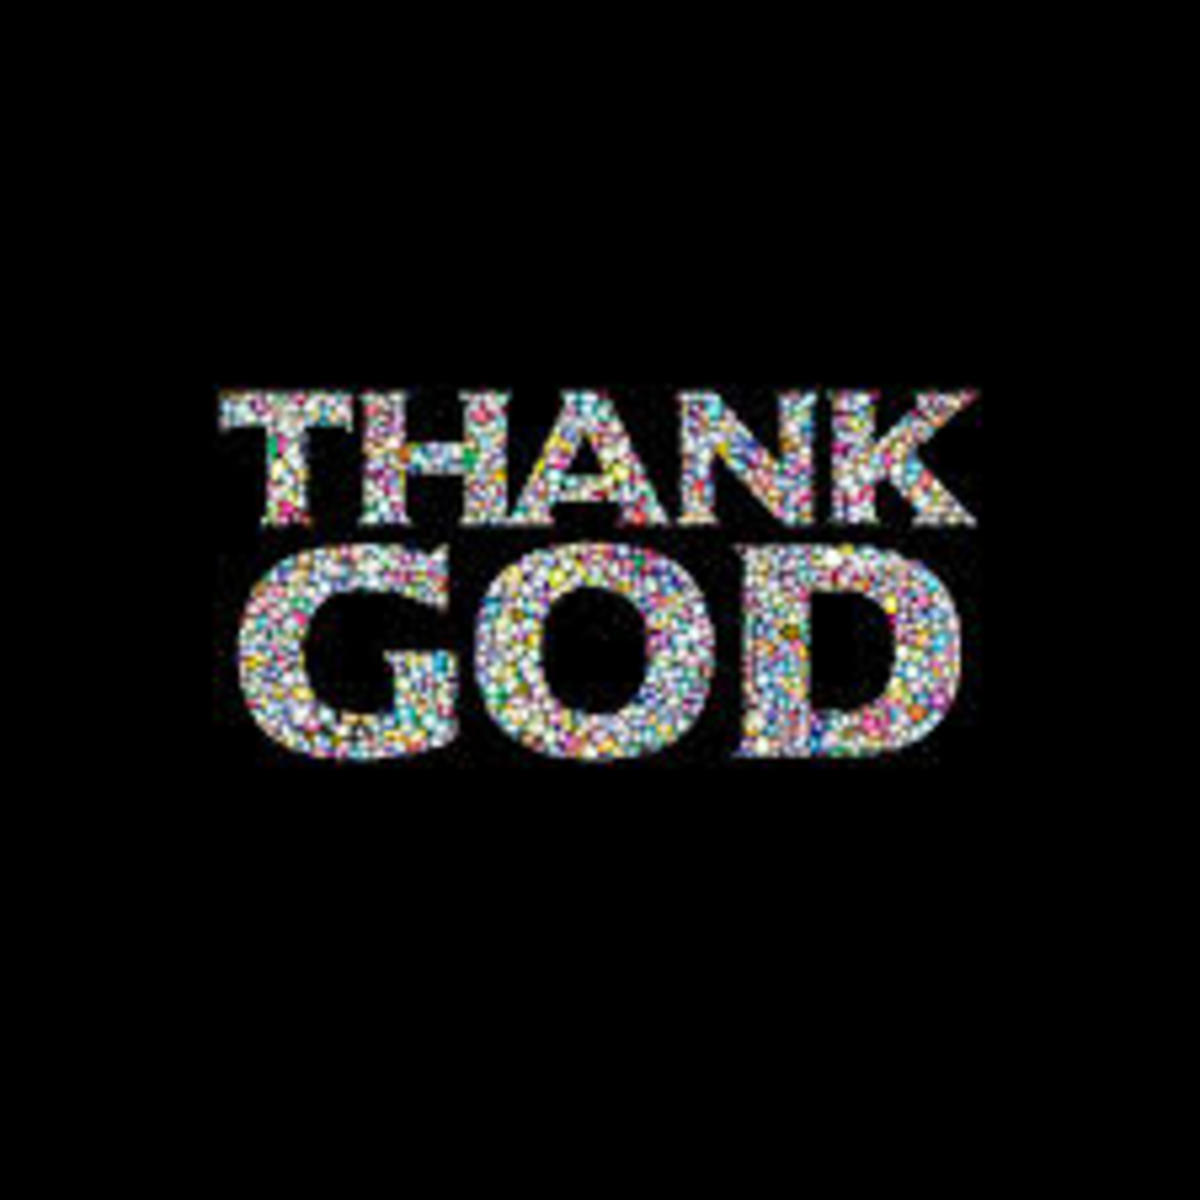 give-thanks-to-god-in-the-dark-times-of-life